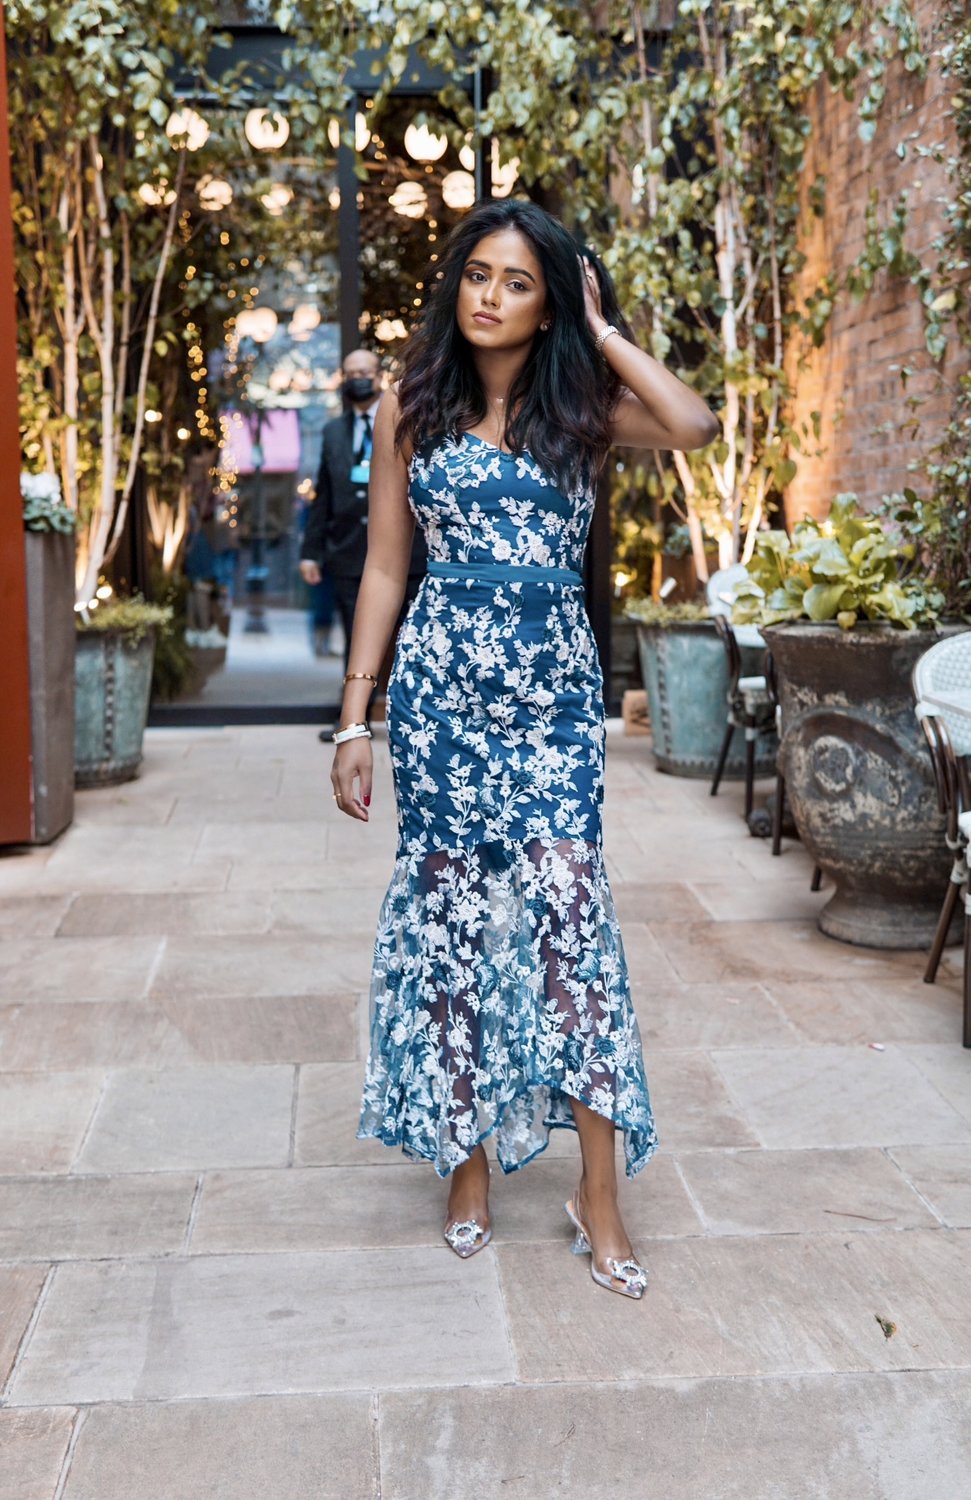 Sachini standing in an alley with trees in the background wearing a blue Chi Chi London dress